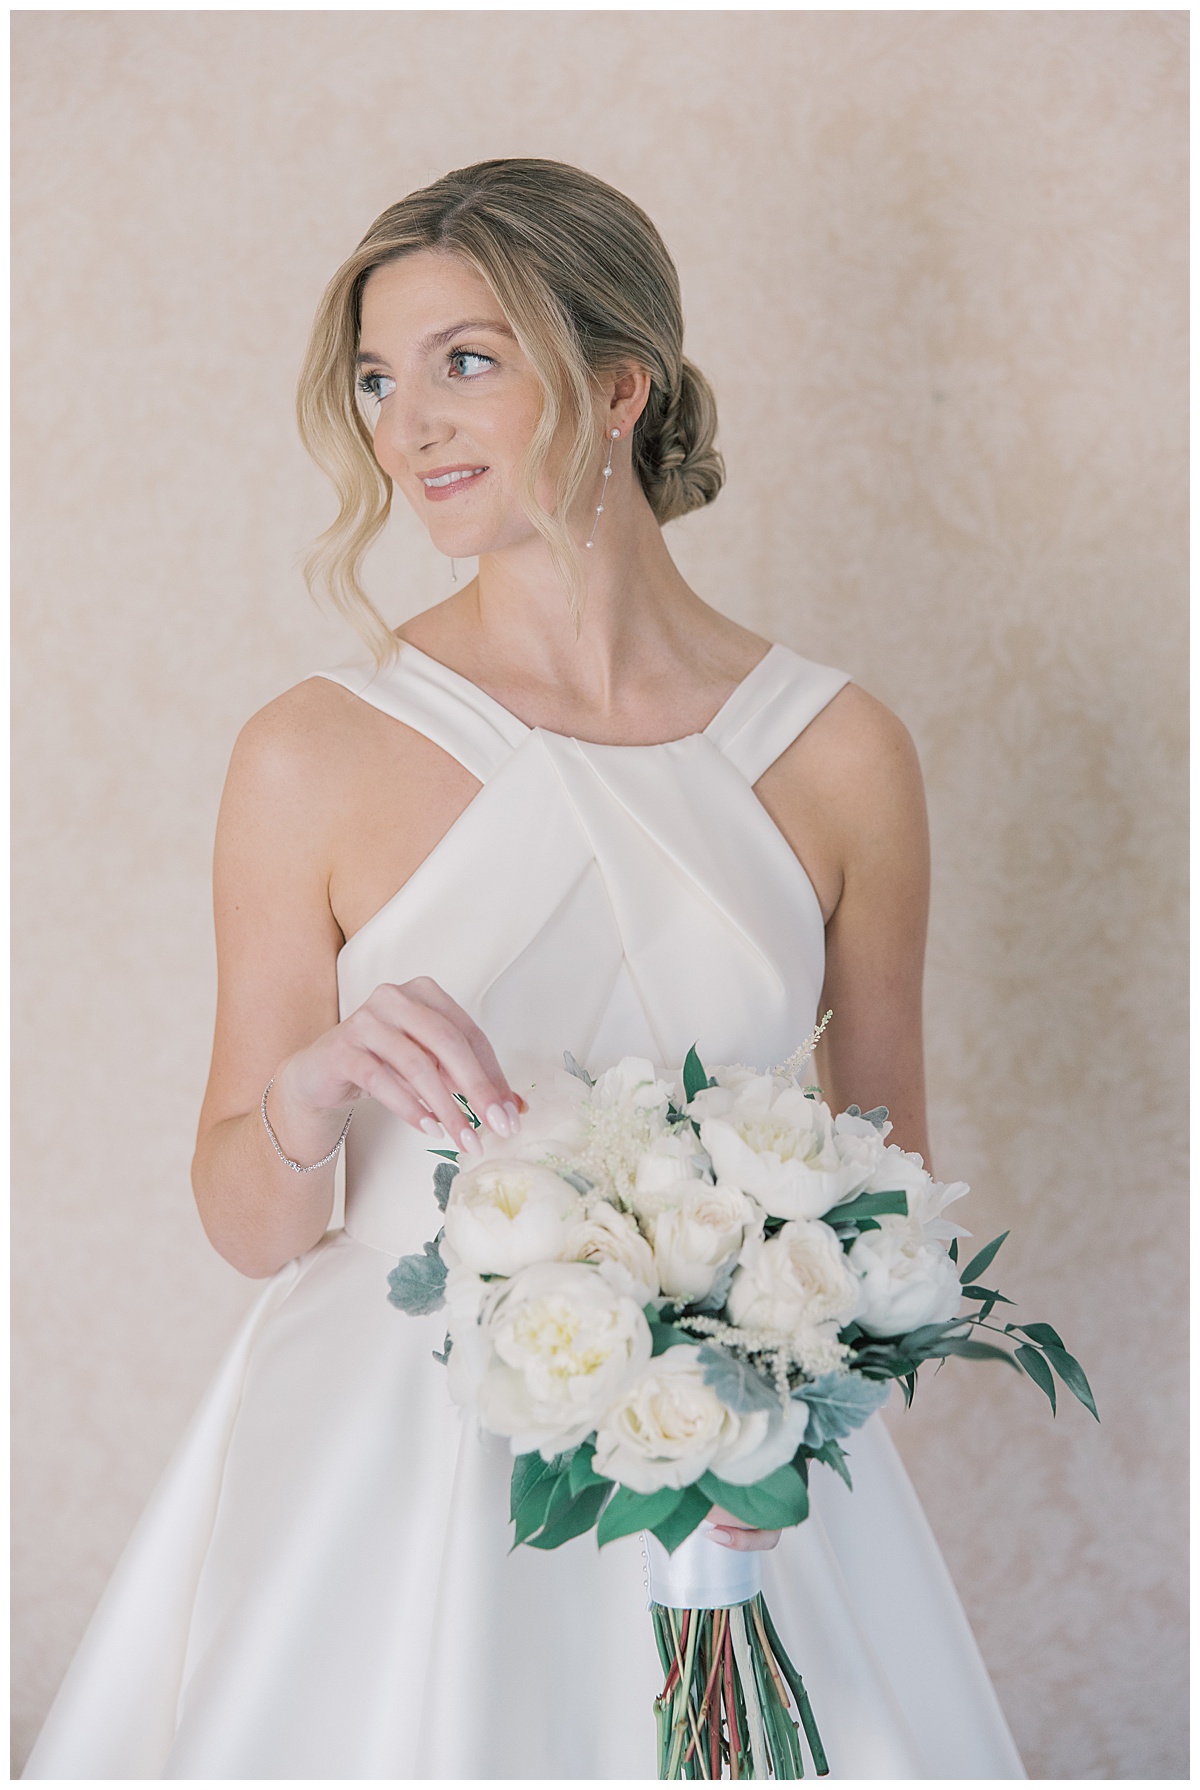 Bridal portraits with white and green bouquet and satin wedding gown. 